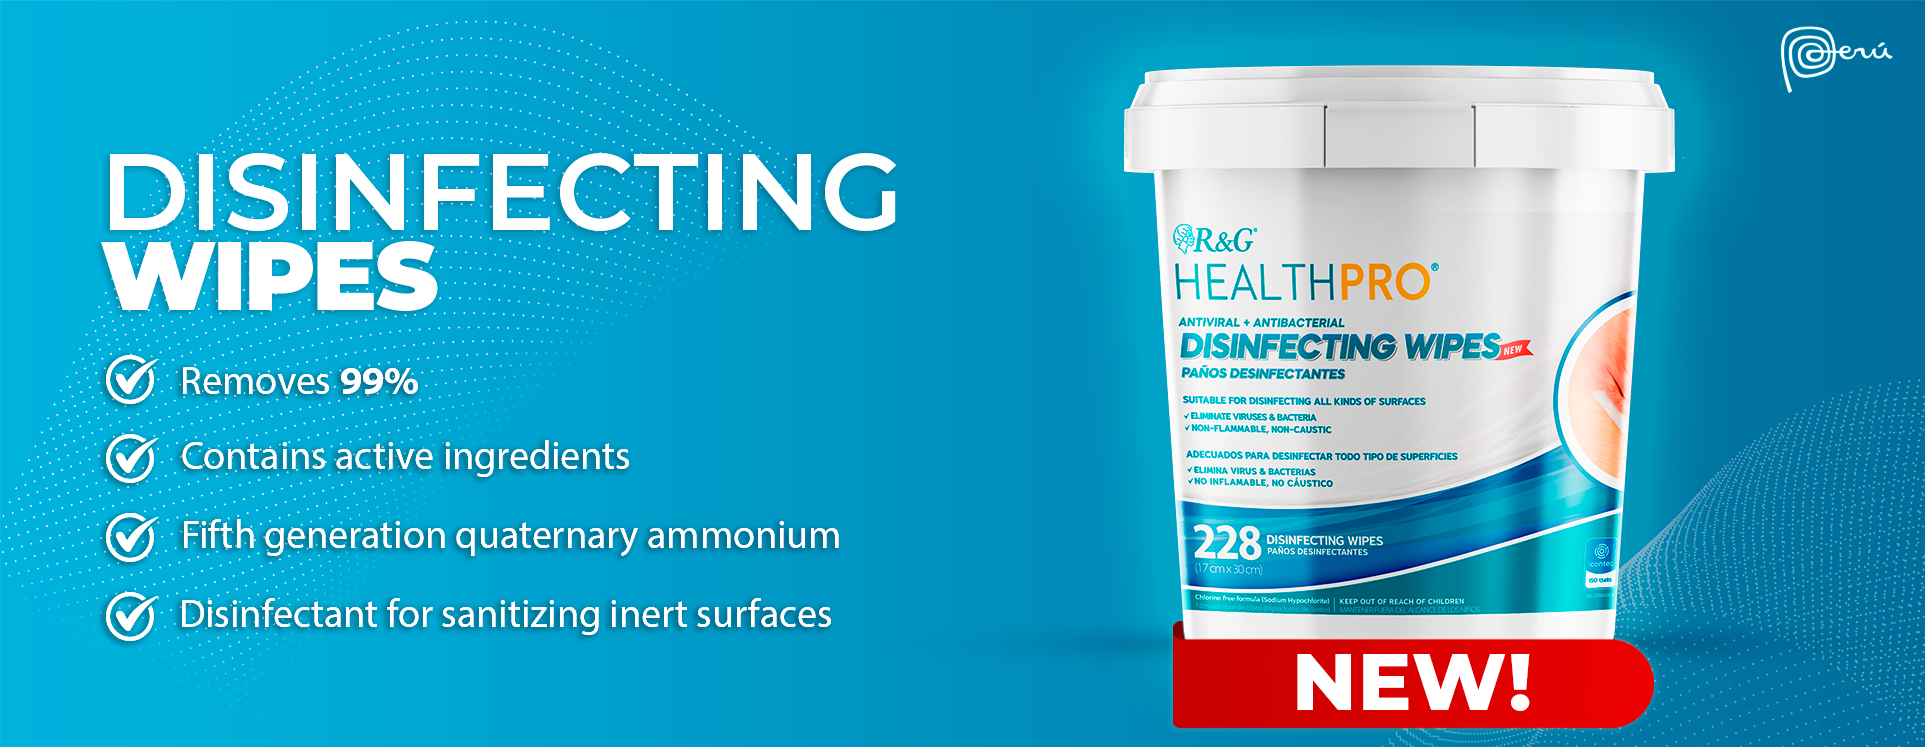 Desinfecting Wipes